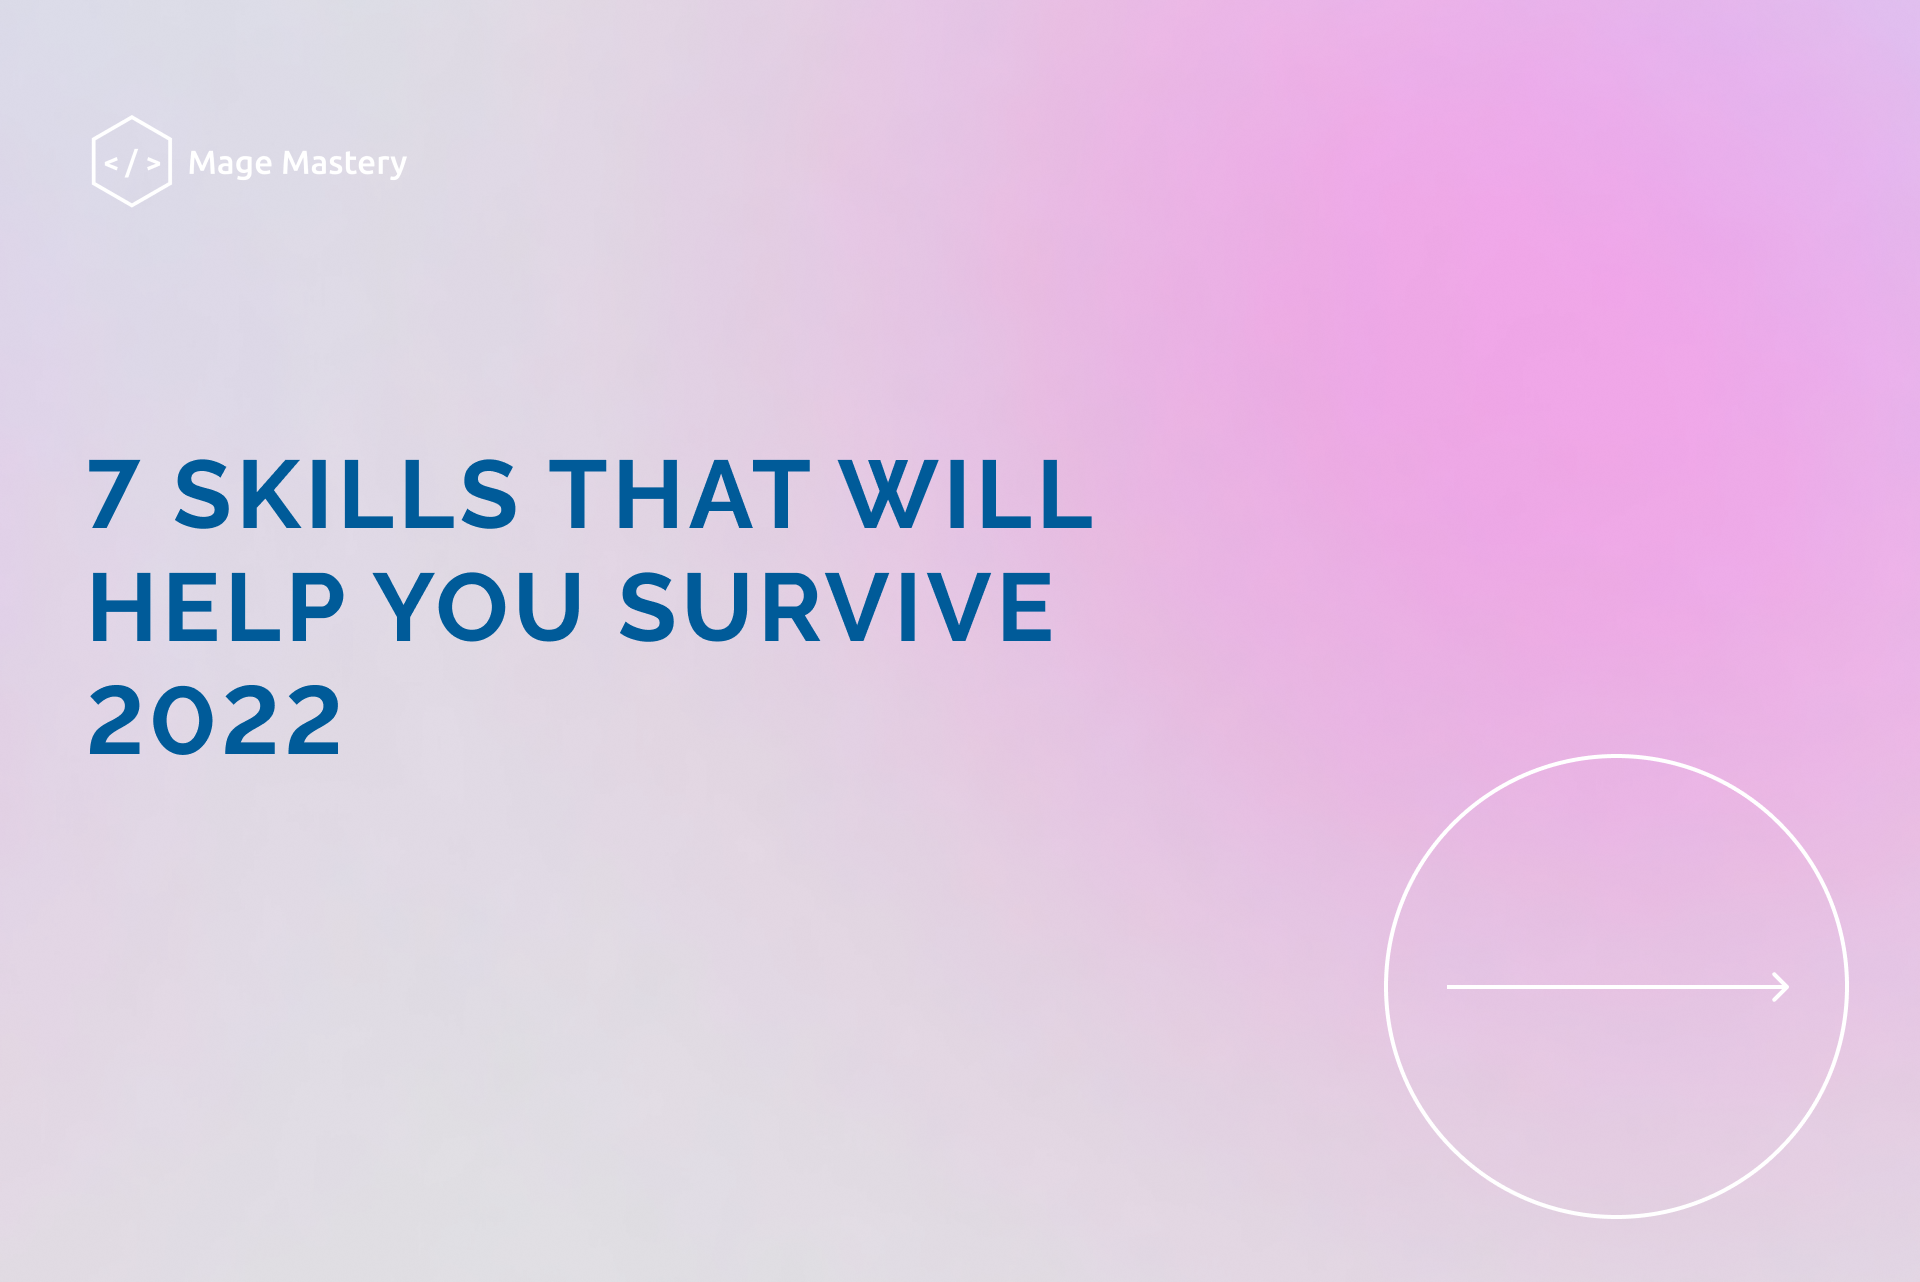 Seven skills that will help you survive 2022